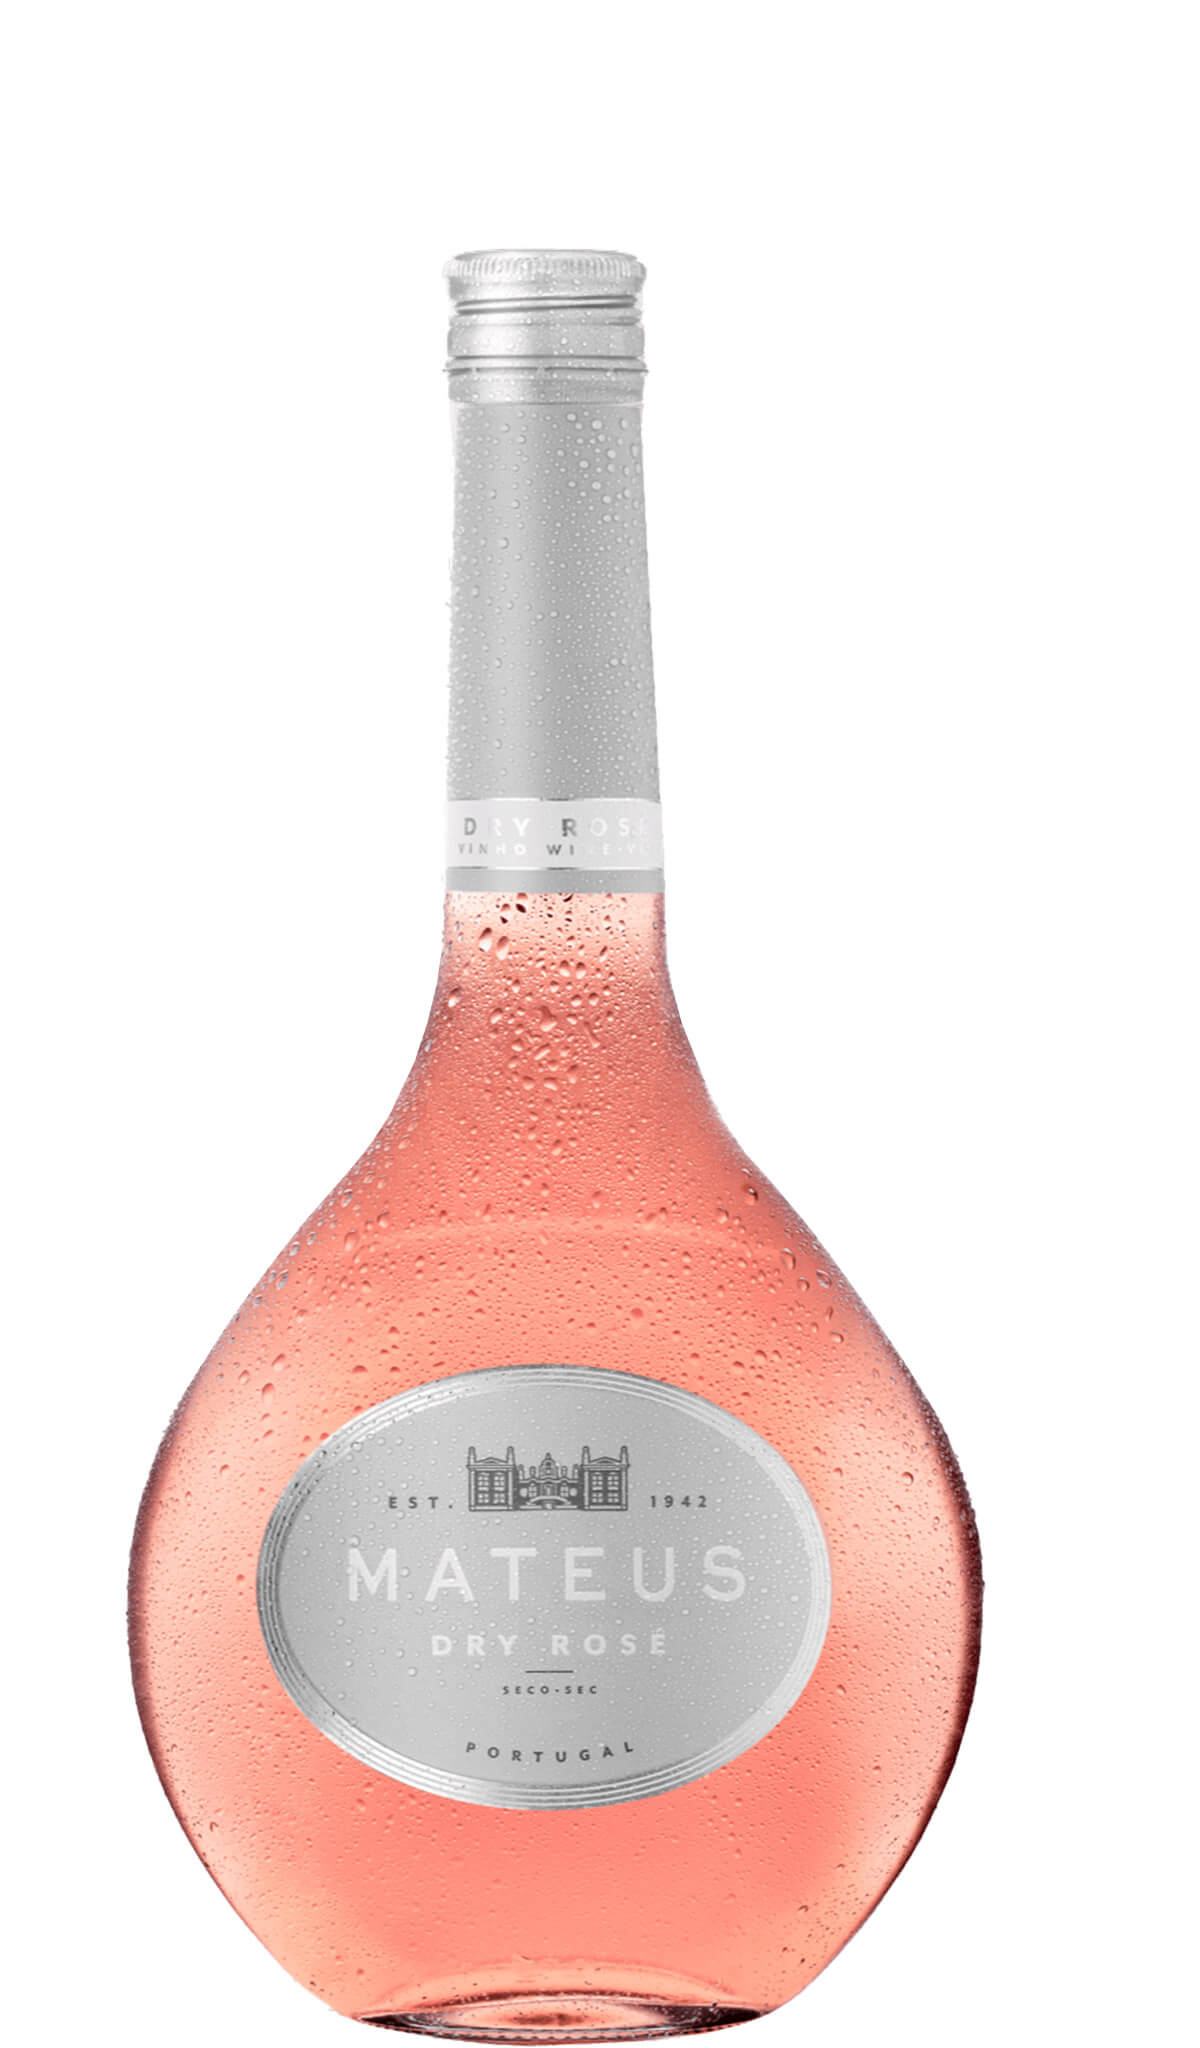 Find out more or buy Mateus Dry Rosé NV 750mL (Portugal) online at Wine Sellers Direct - Australia’s independent liquor specialists.